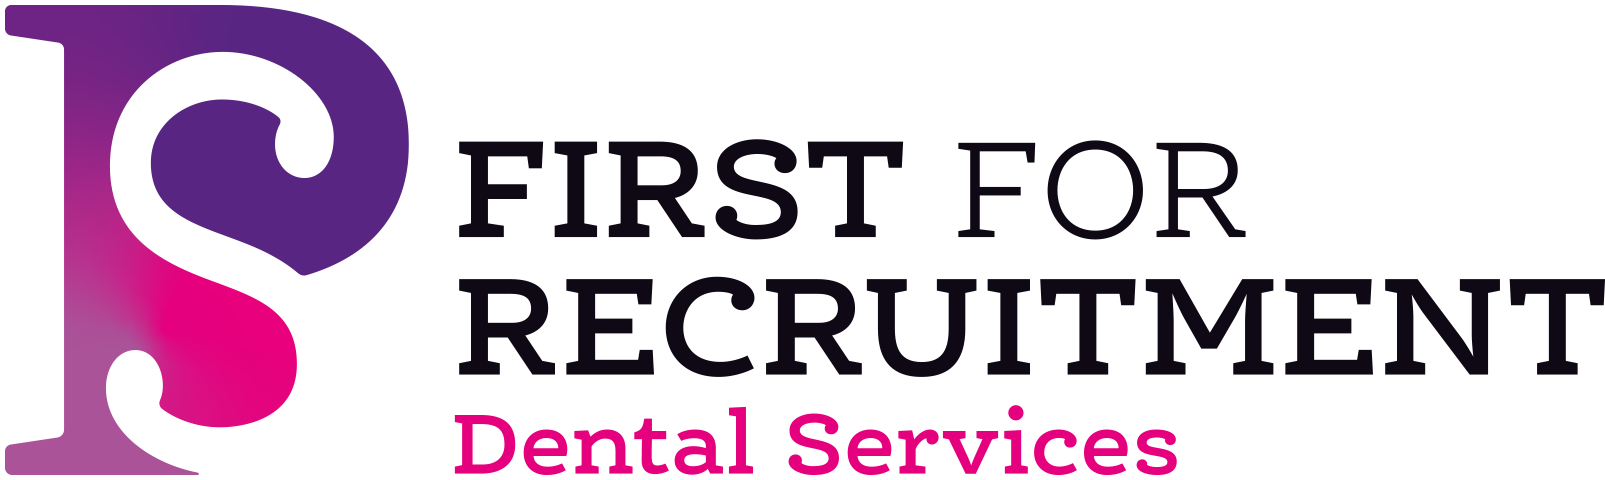 PS First For Recruitment Dental Services